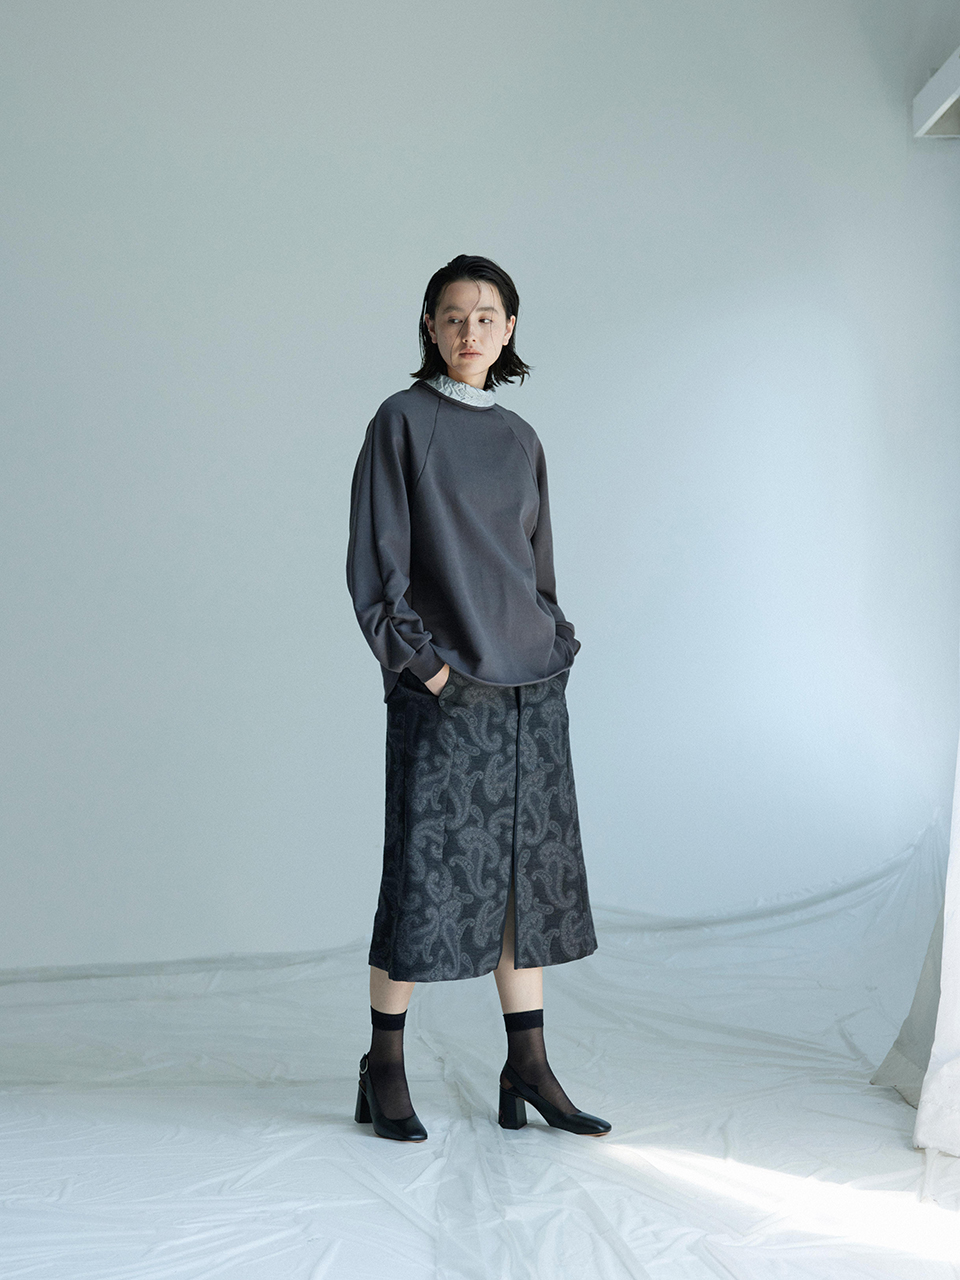 Y.M.Walts 2023aw collection [　Clear night without moon　]